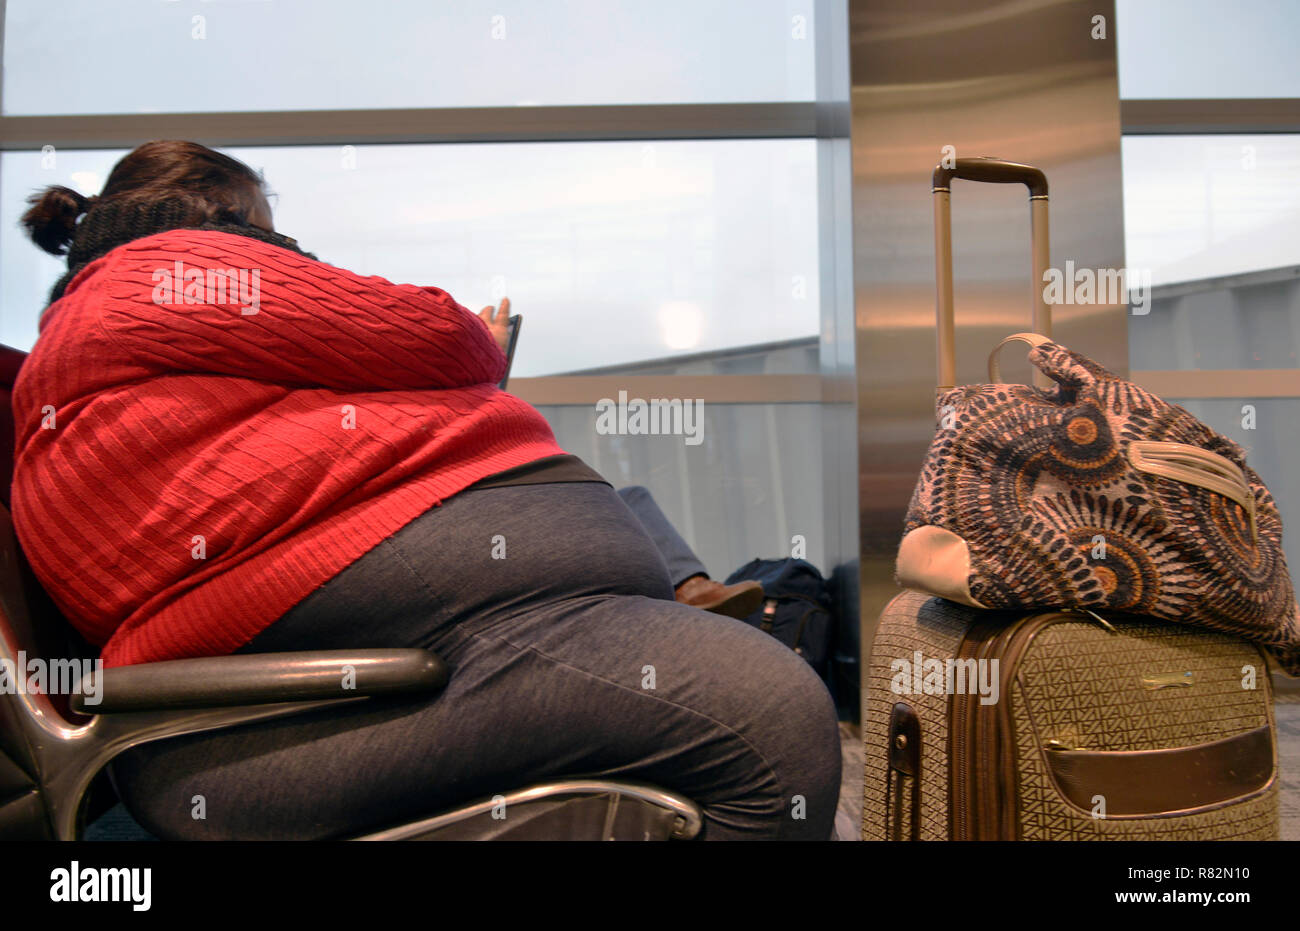 Obese, overweight people Stock Photo